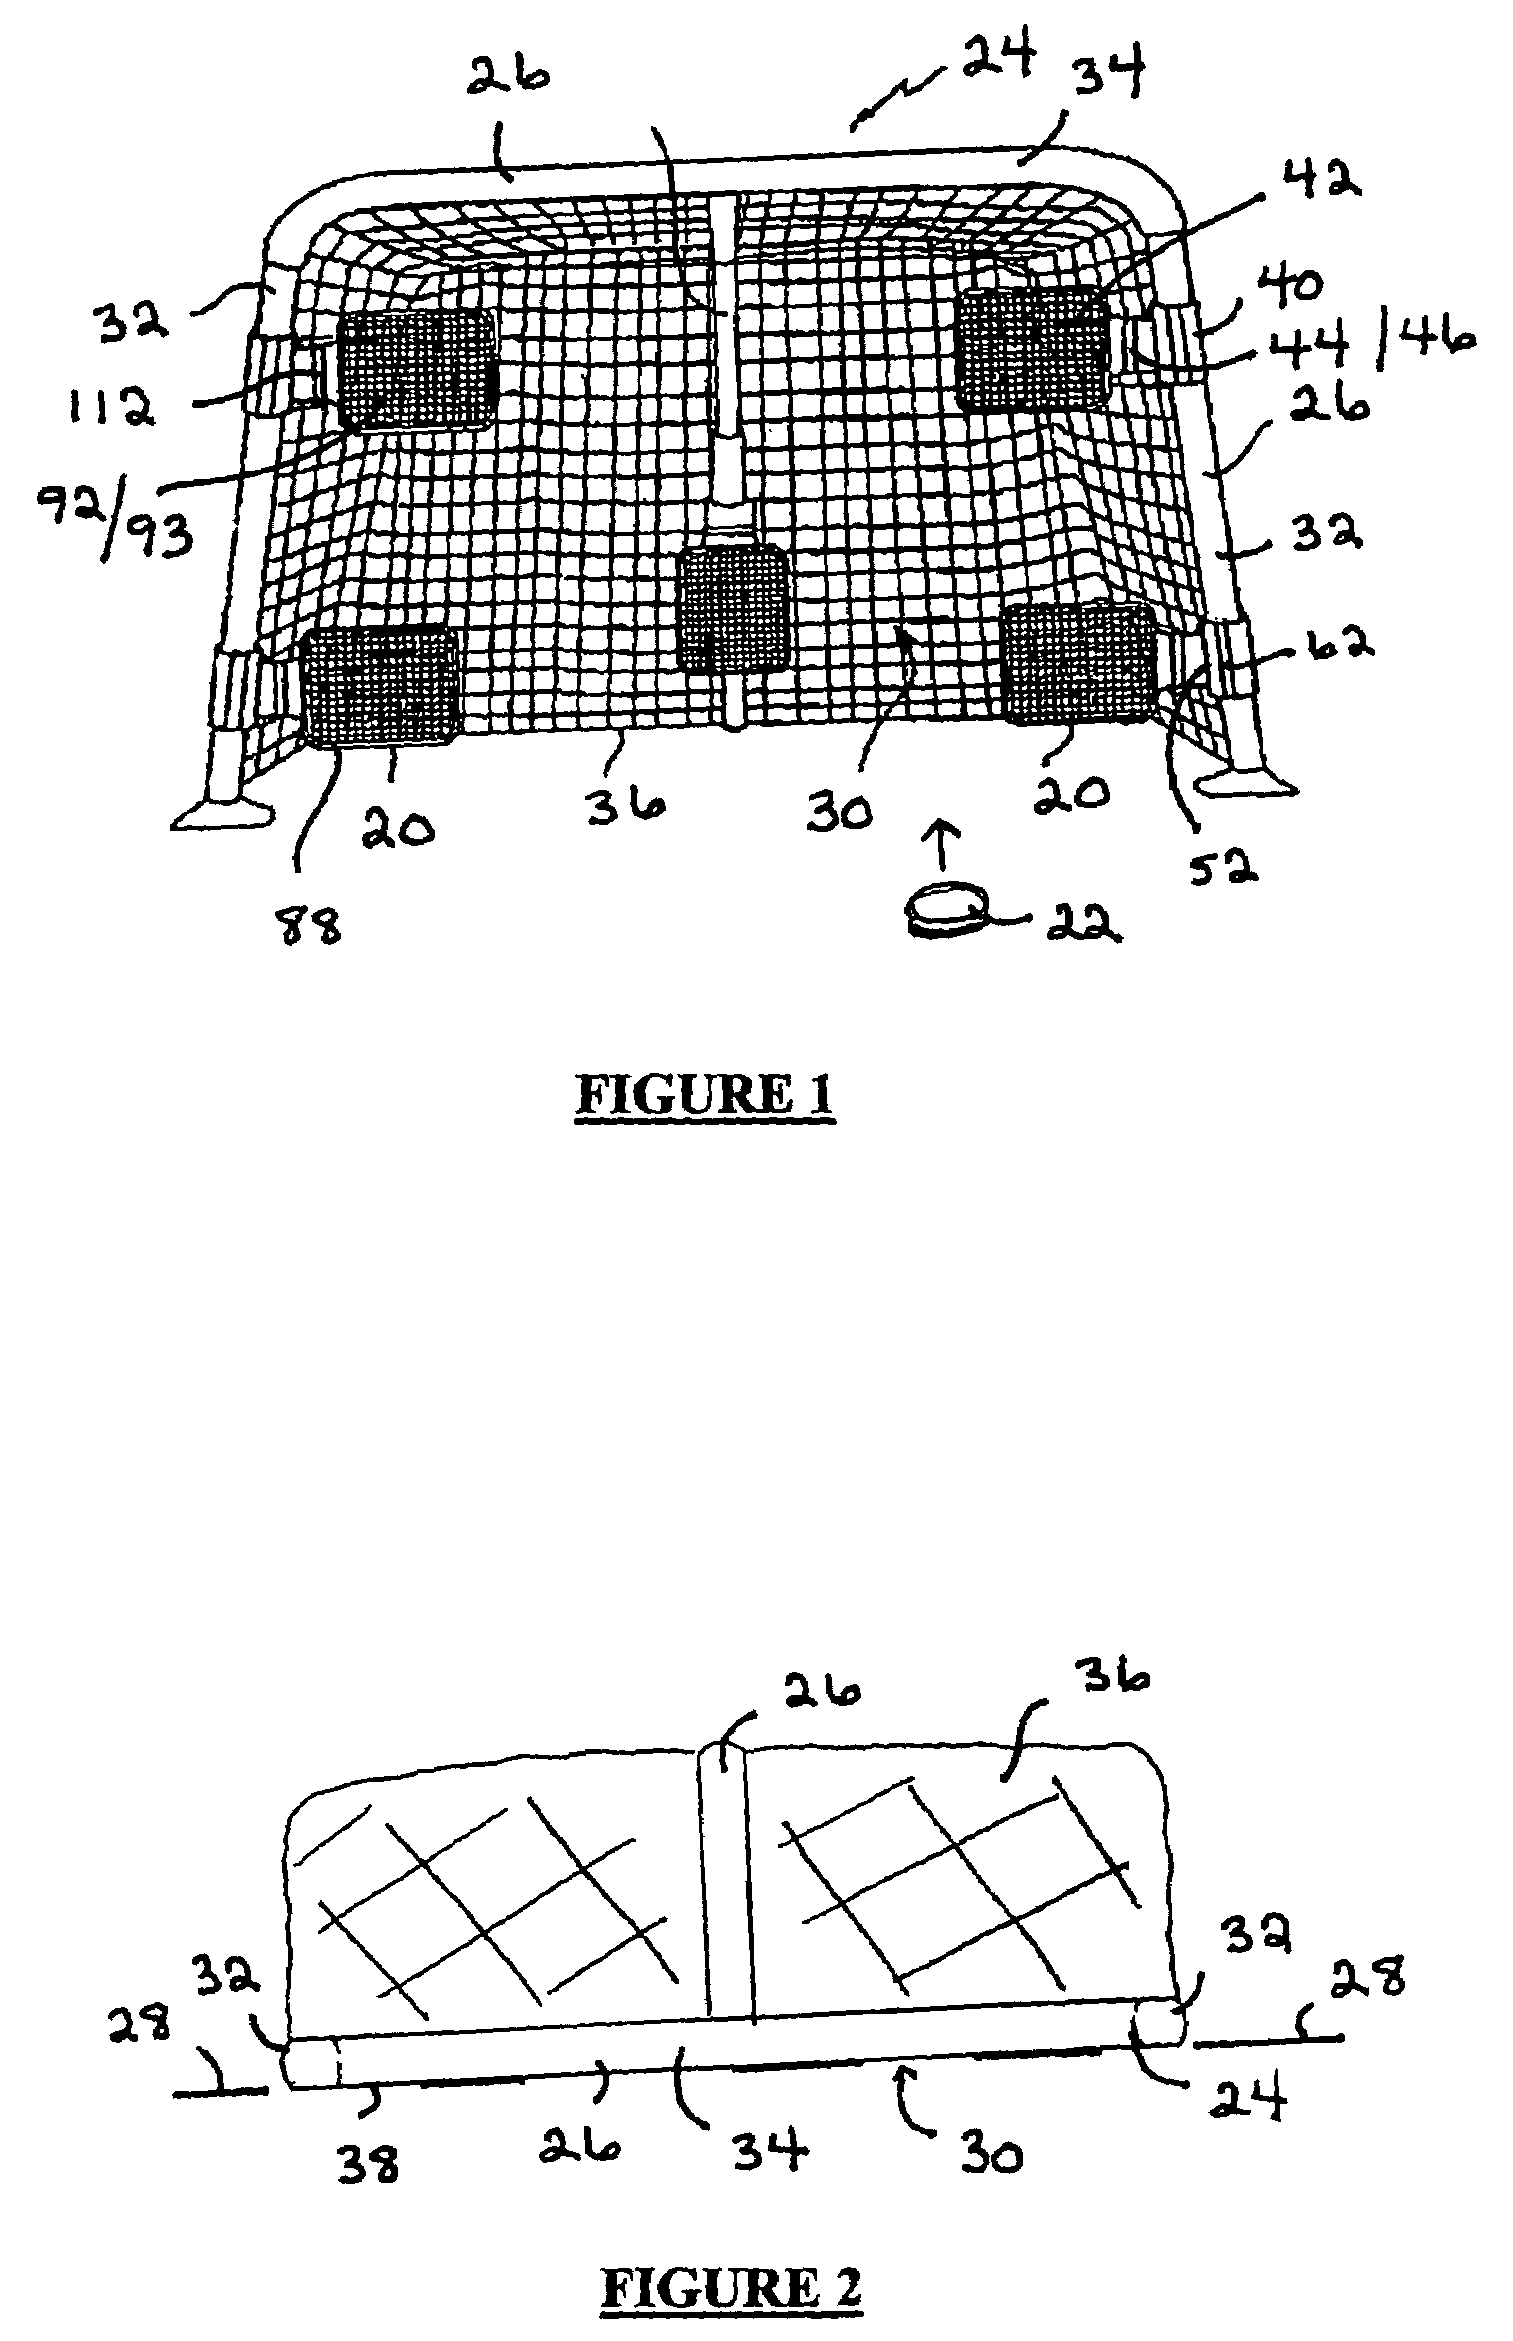 Target apparatus for a sport goal